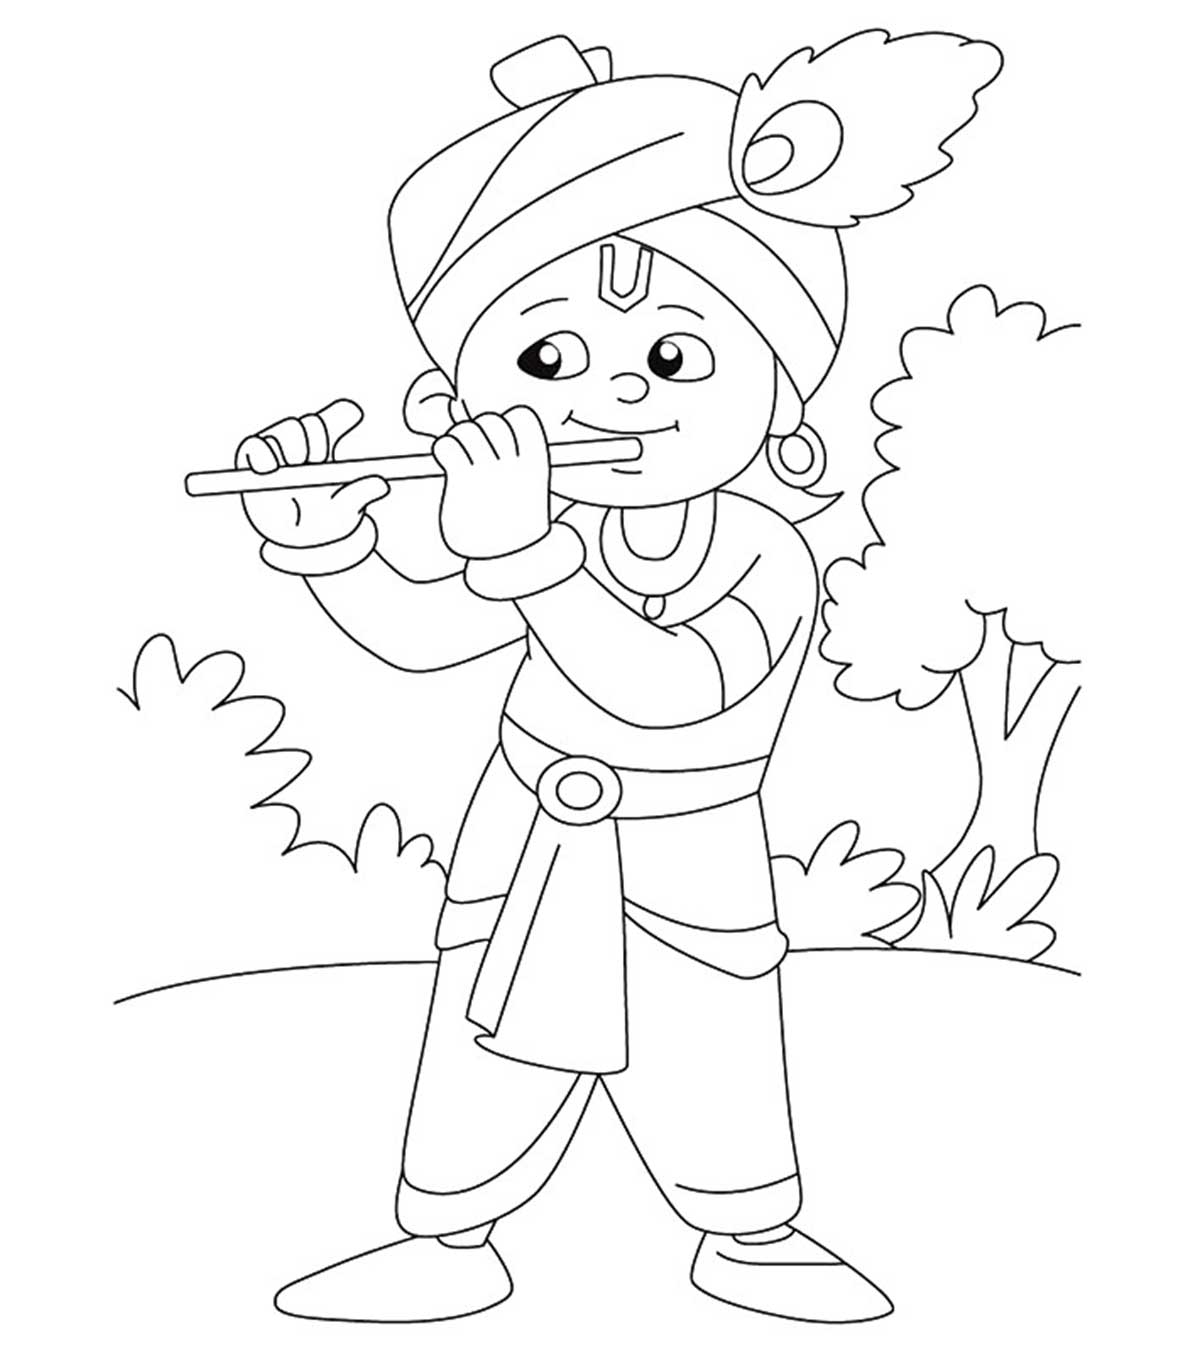 10 Best Flute Coloring Pages Your Toddler Will Love - Coloring Home